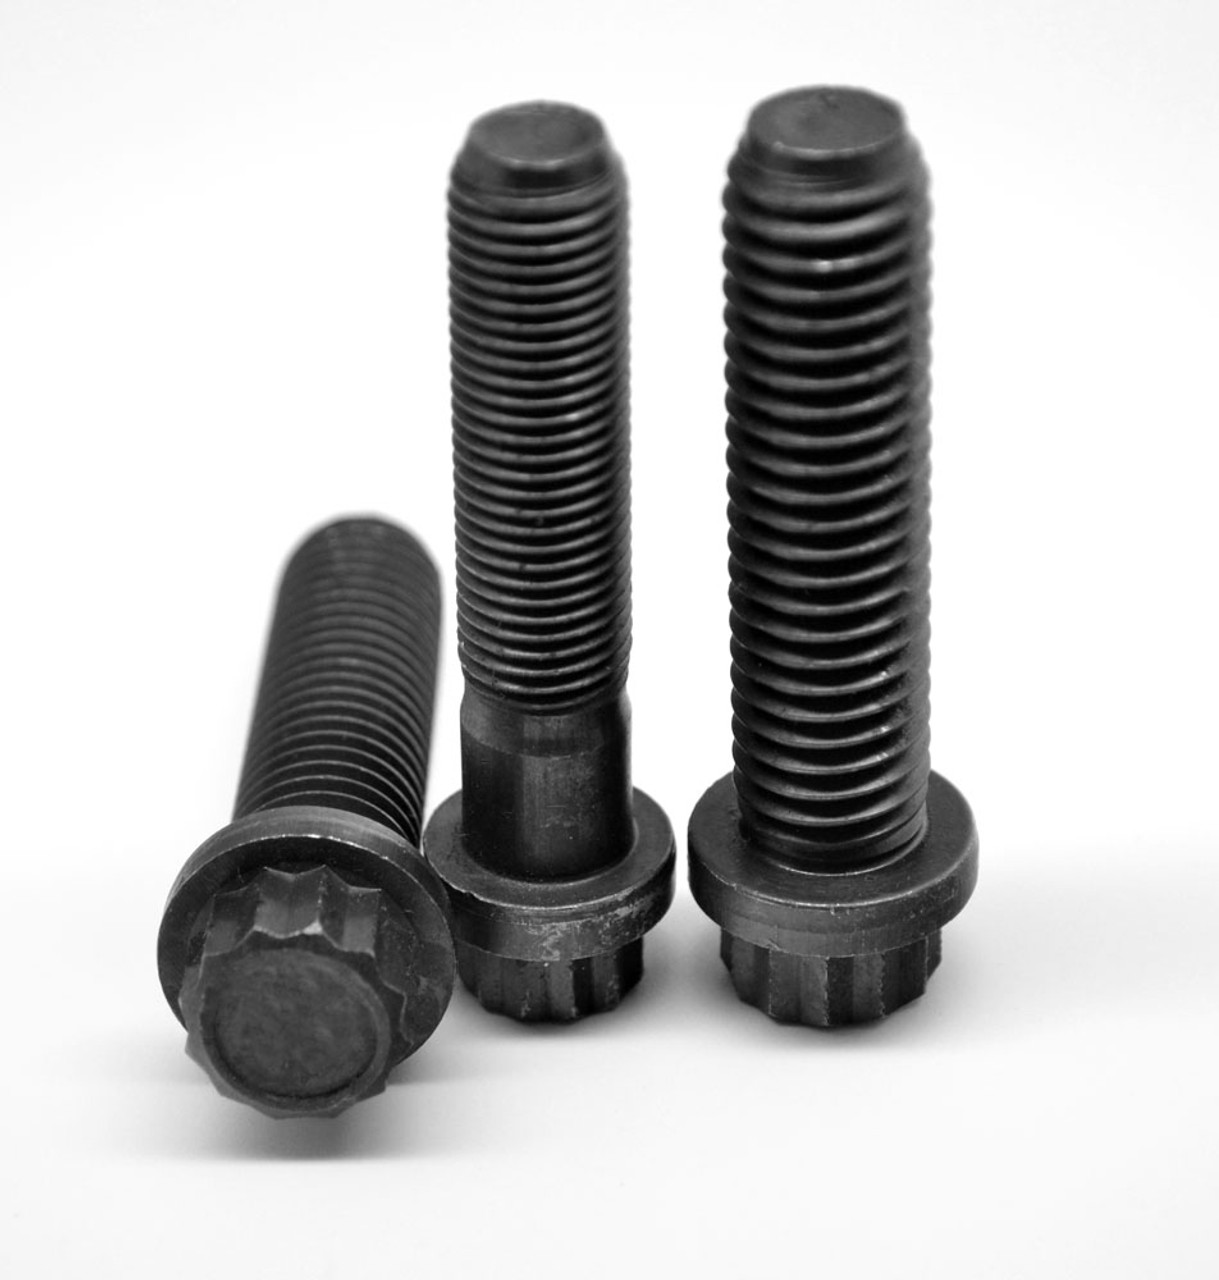 1/2-13 x 3 Coarse Thread 12-Point Flange Screw Alloy Steel Thermal Black Oxide